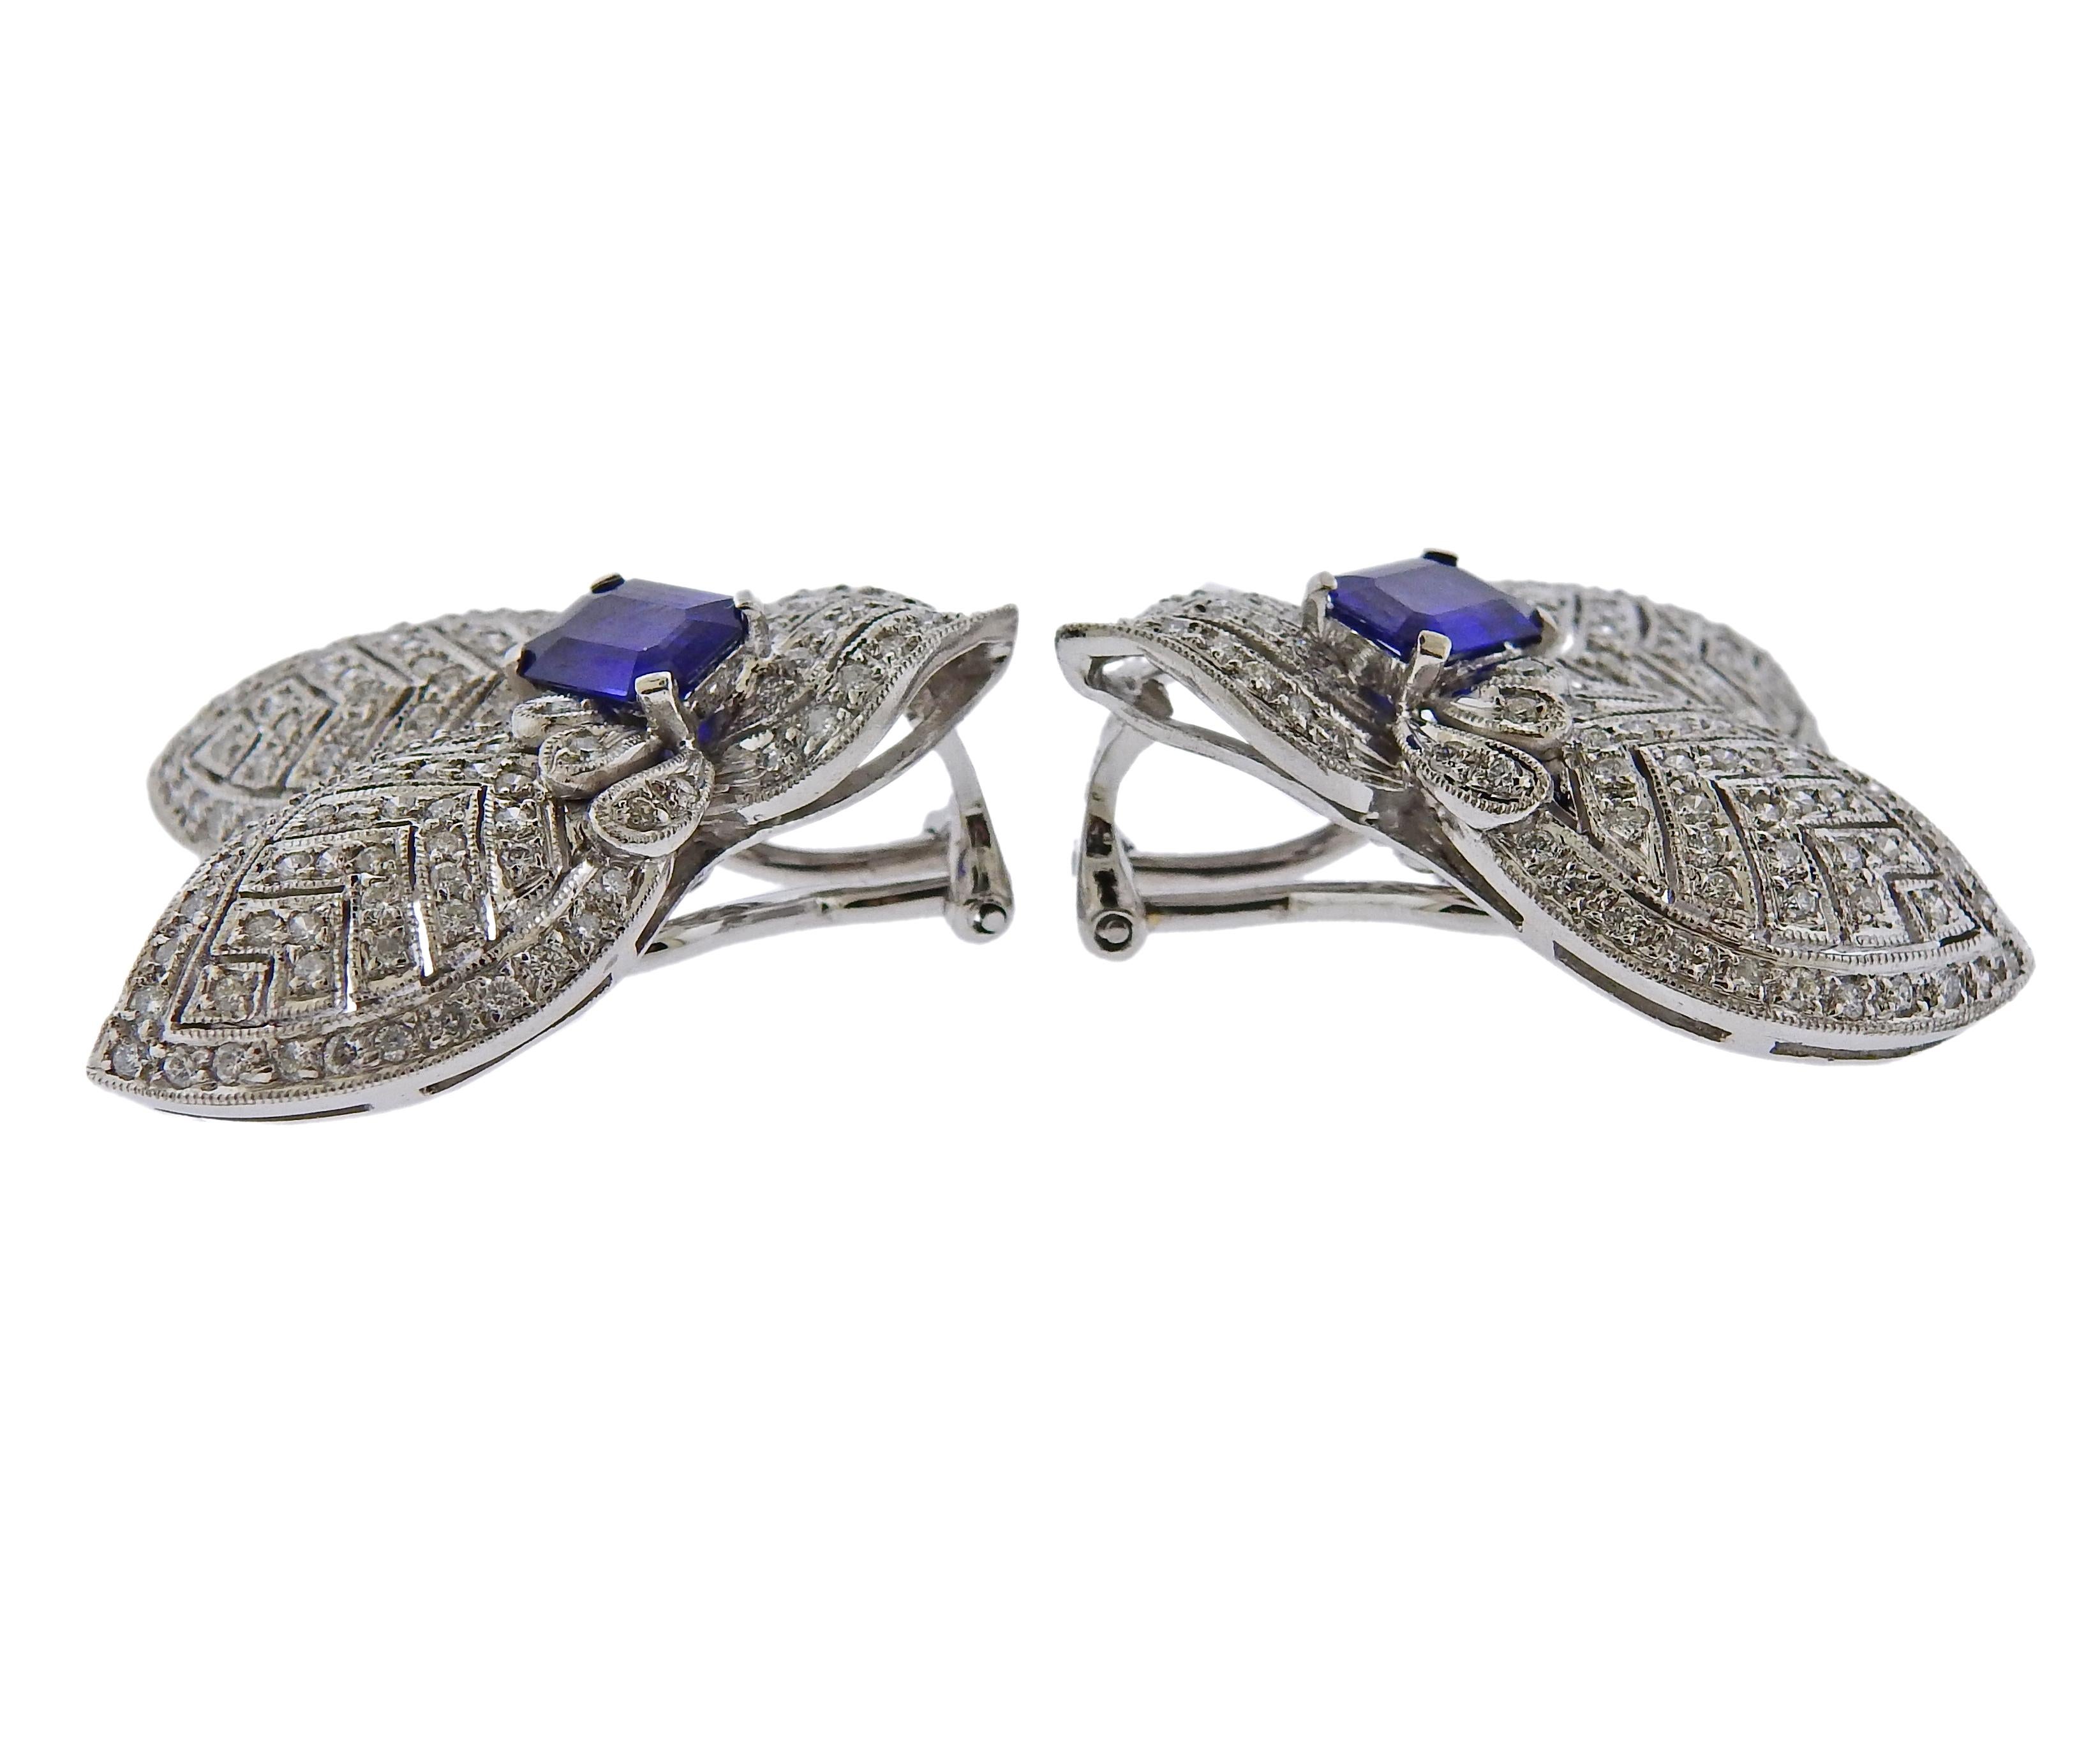 Pair of 18k white gold cocktail earrings, set with blue sapphires in the center, measuring approx. 7mm x 4.9mm, surrounded with approx. 0.70ctw in diamonds. Marked 750. Earrings measure 30mm x 25mm. Weigh 16.4 grams.